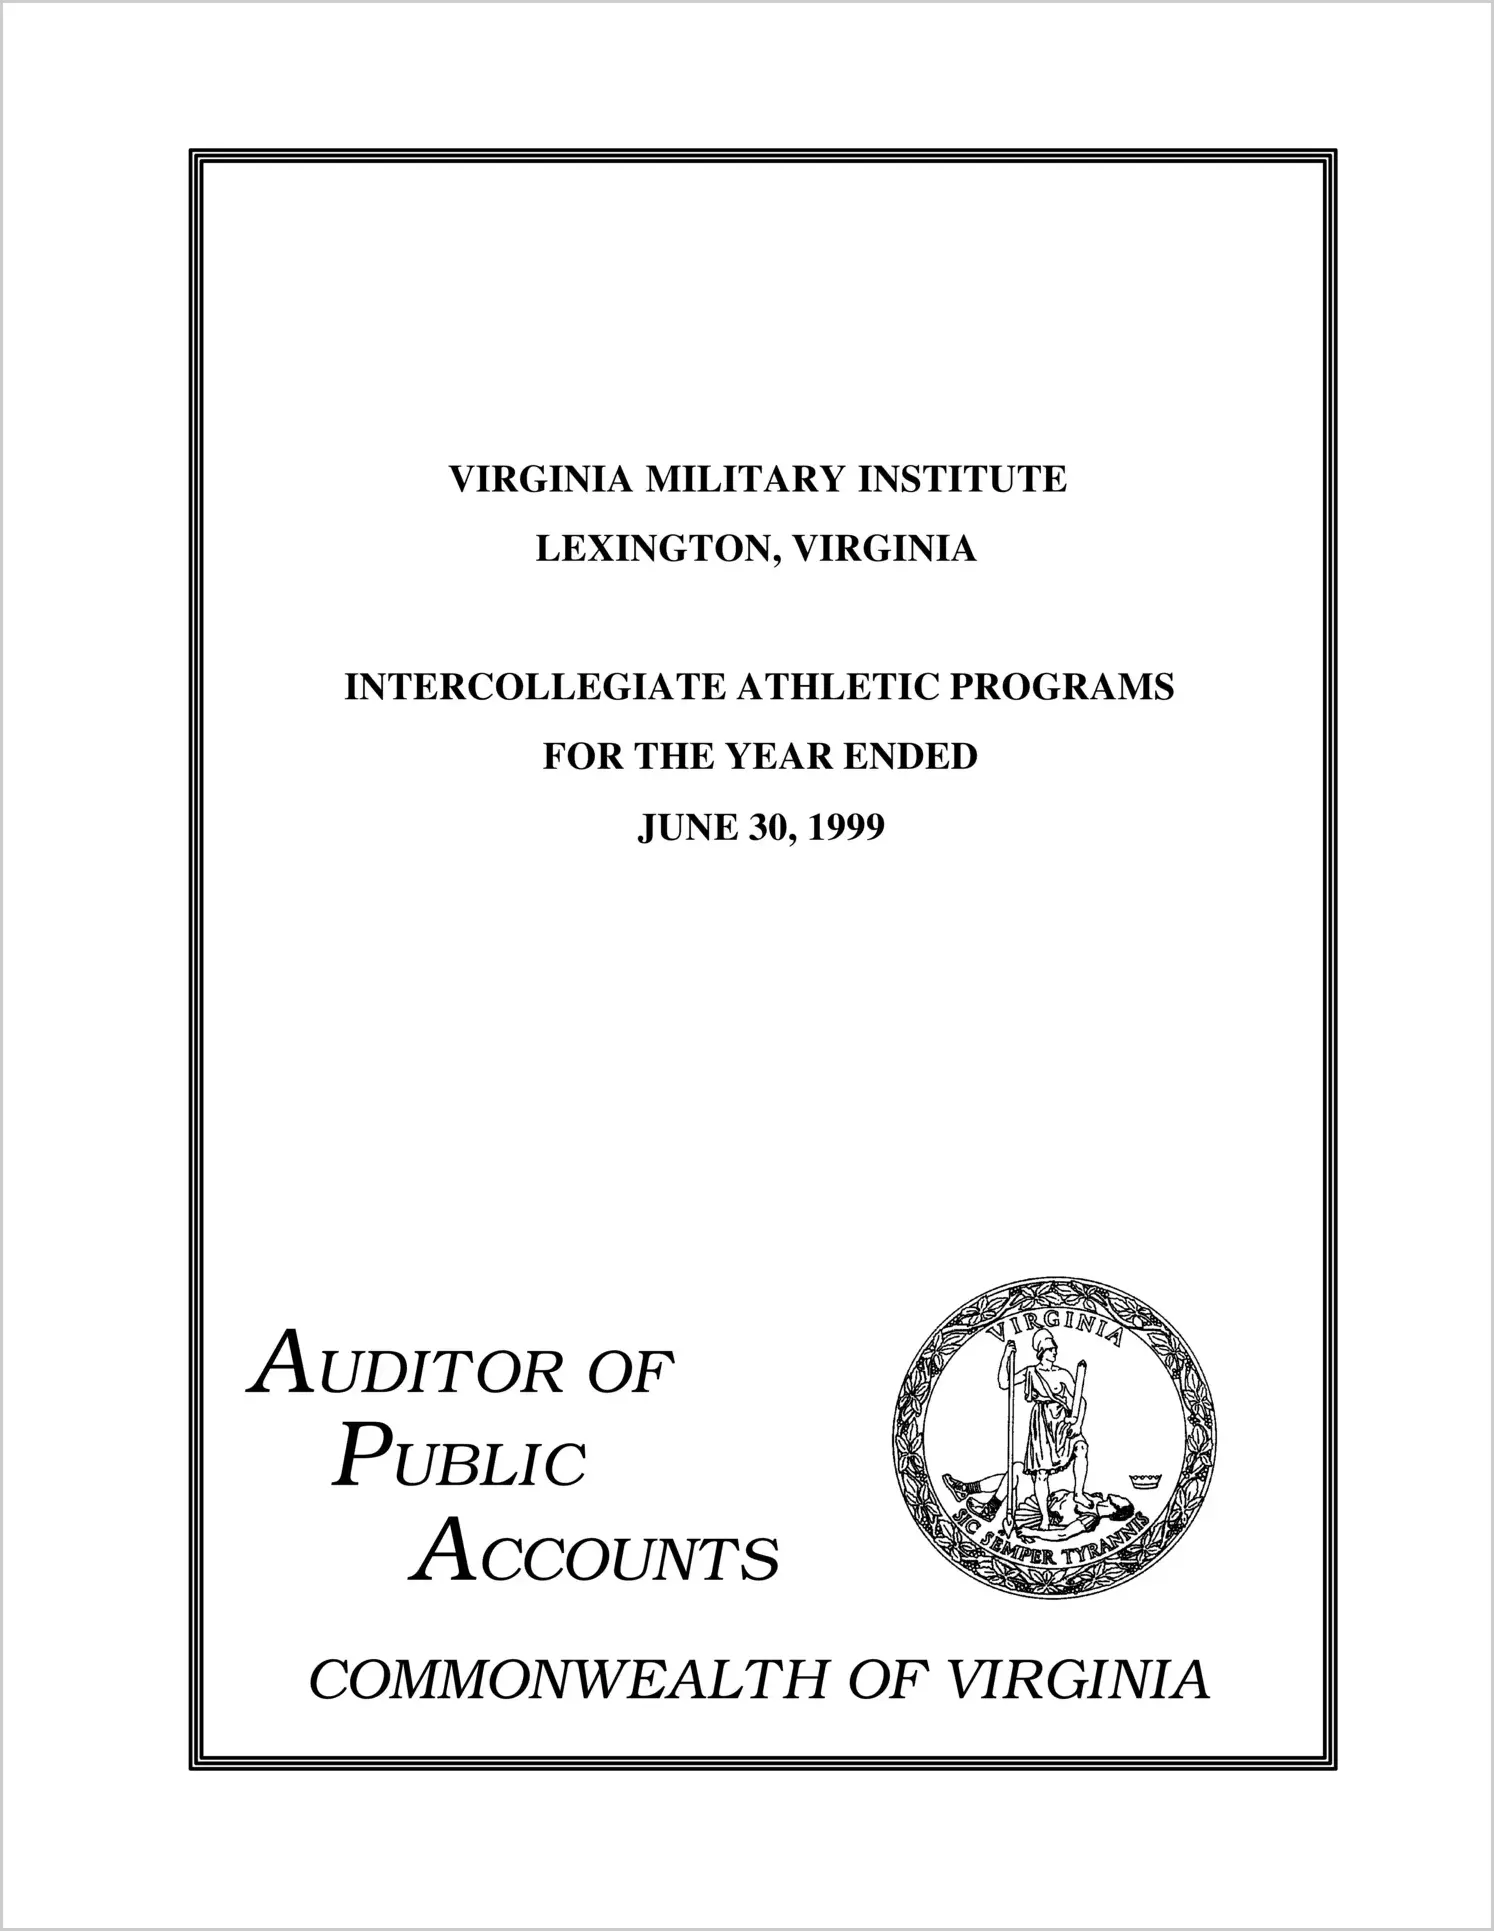 Virginia Military Institute Intercollegiate Athletic Programs for the year ended June 30, 1999